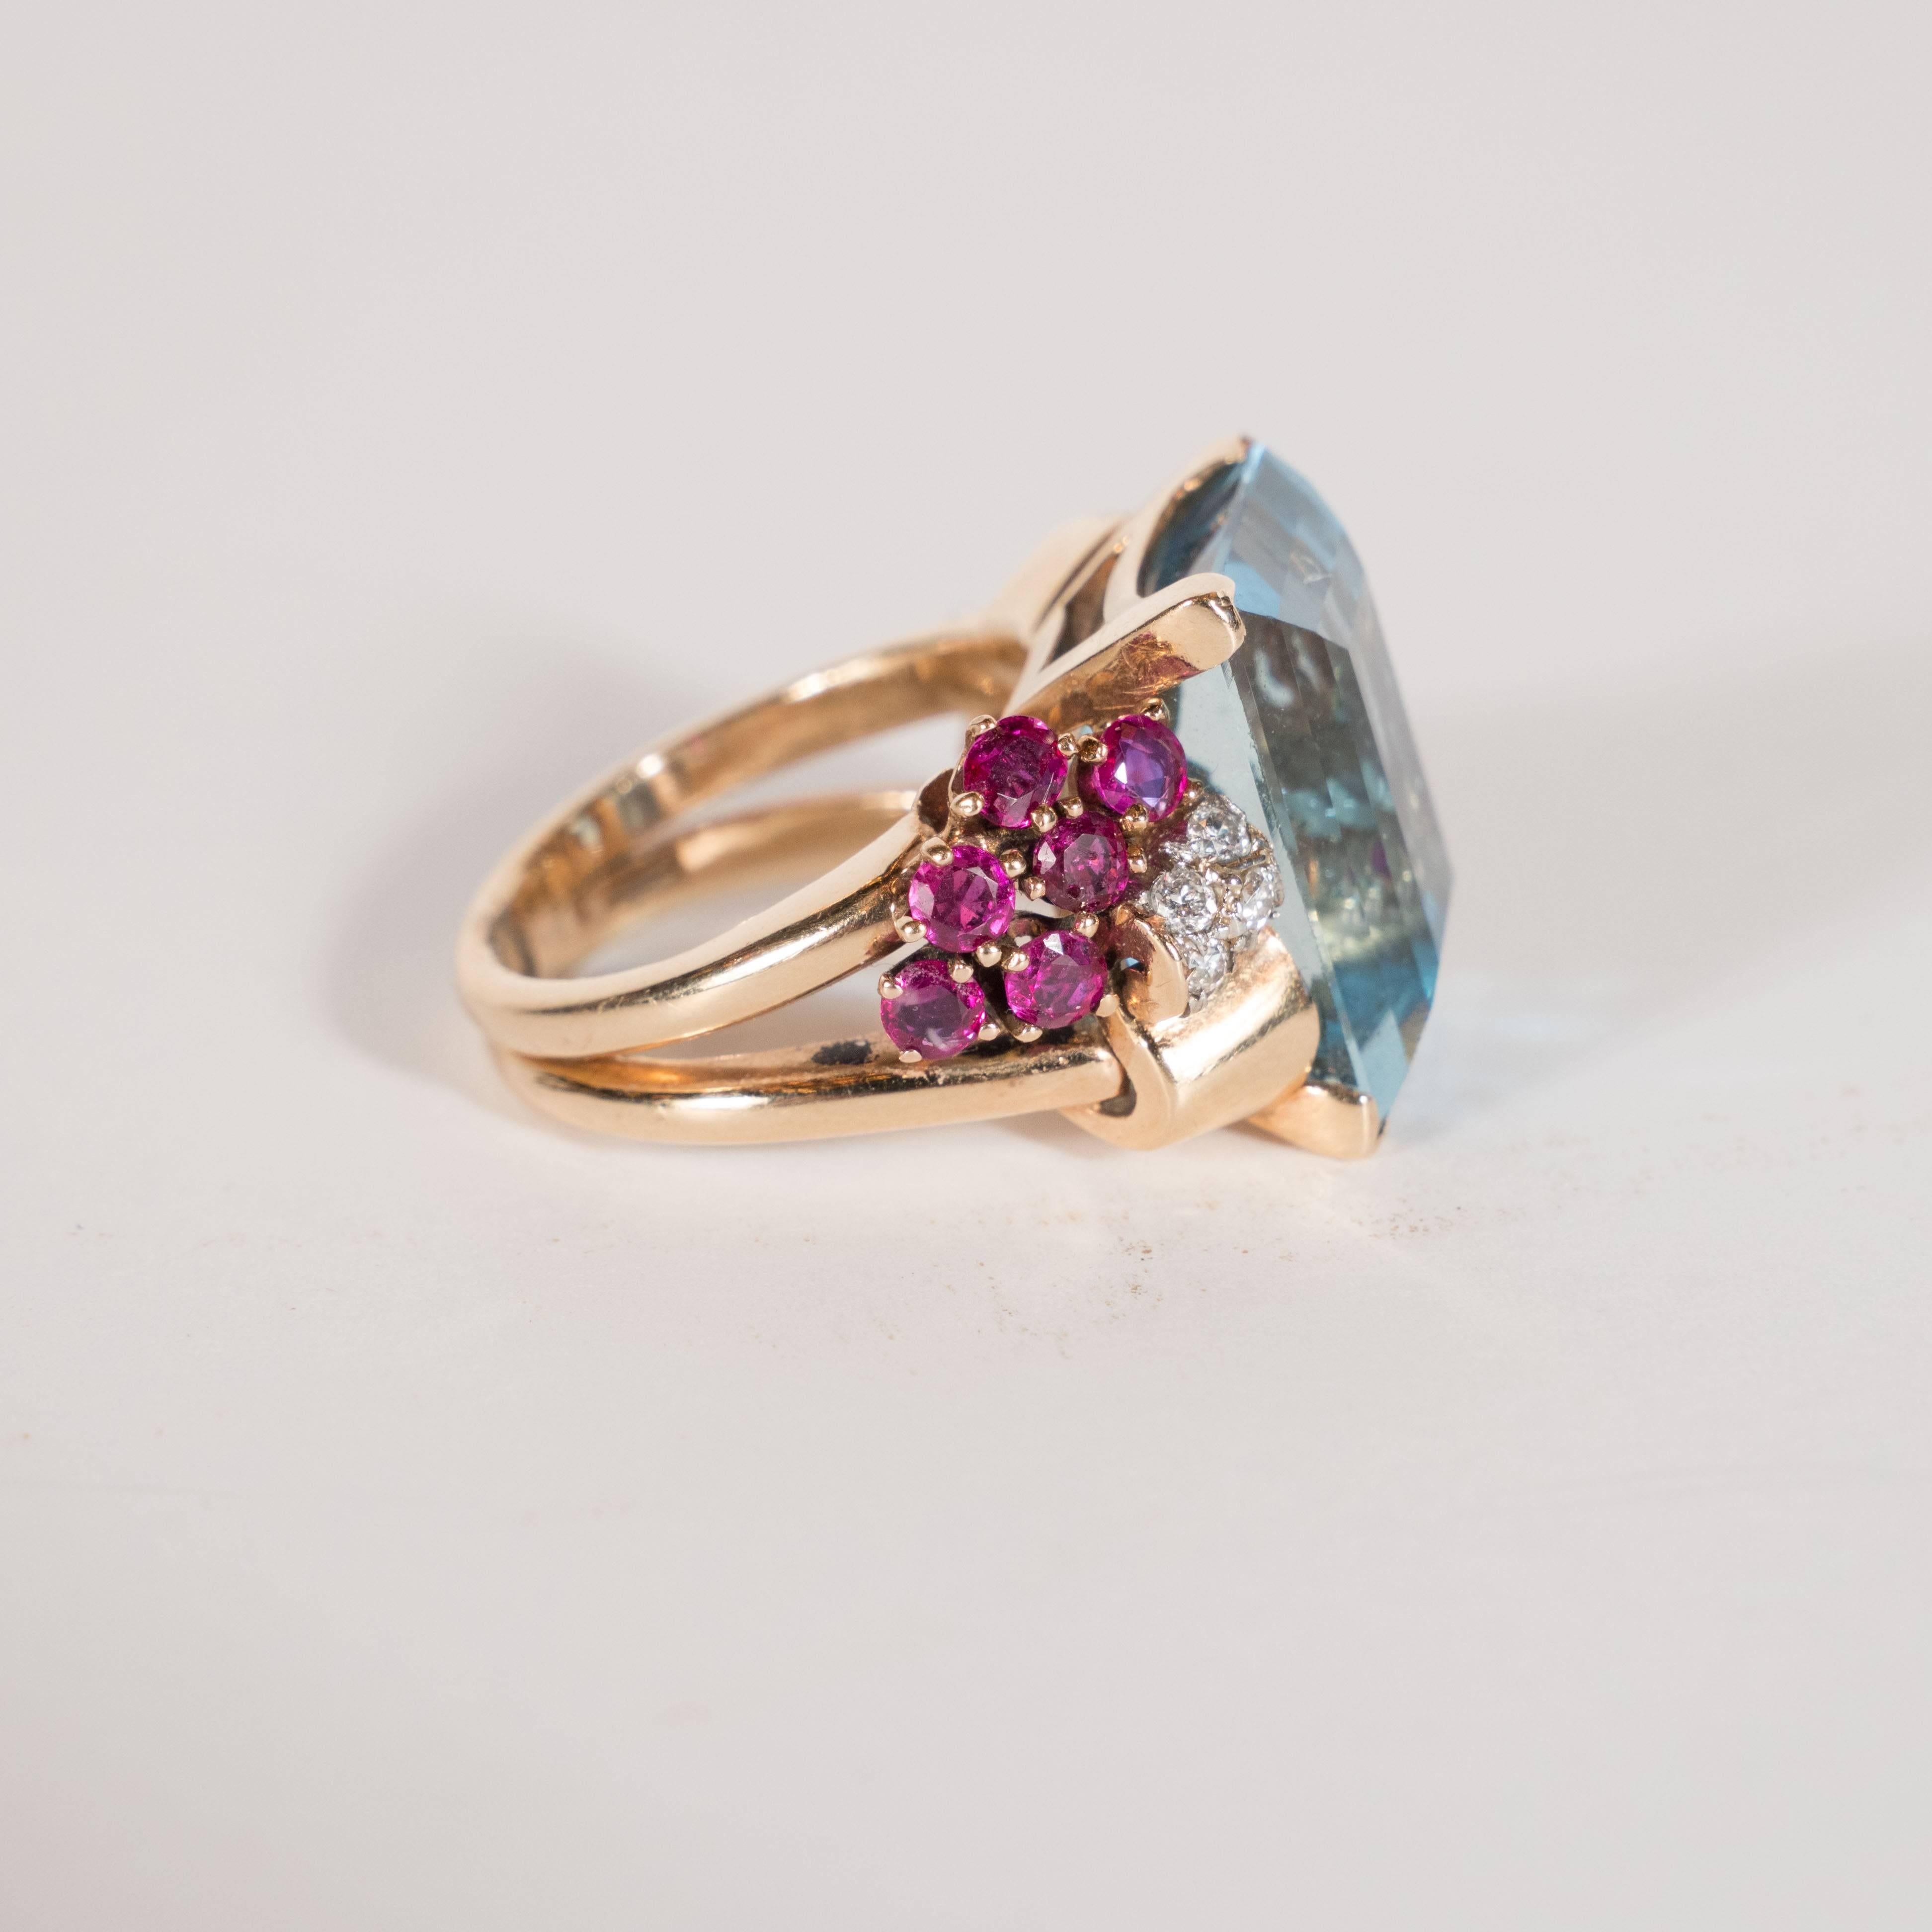 Women's 1940s American 8 Carat Acquamarine and 14k Gold Ring with Rubies and Diamonds